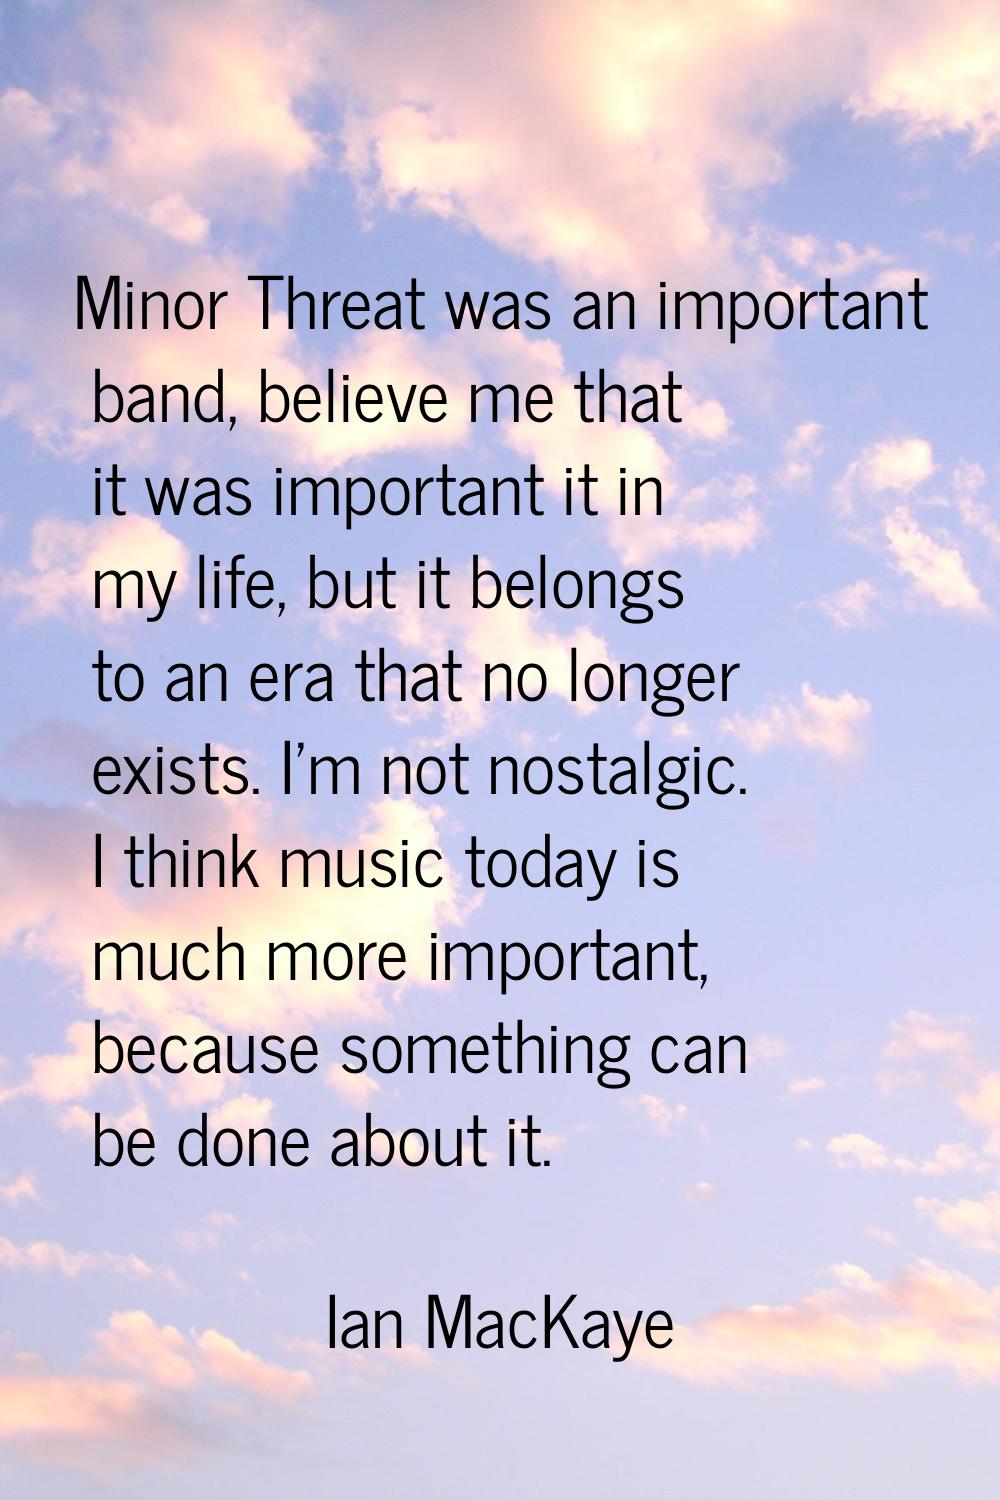 Minor Threat was an important band, believe me that it was important it in my life, but it belongs 